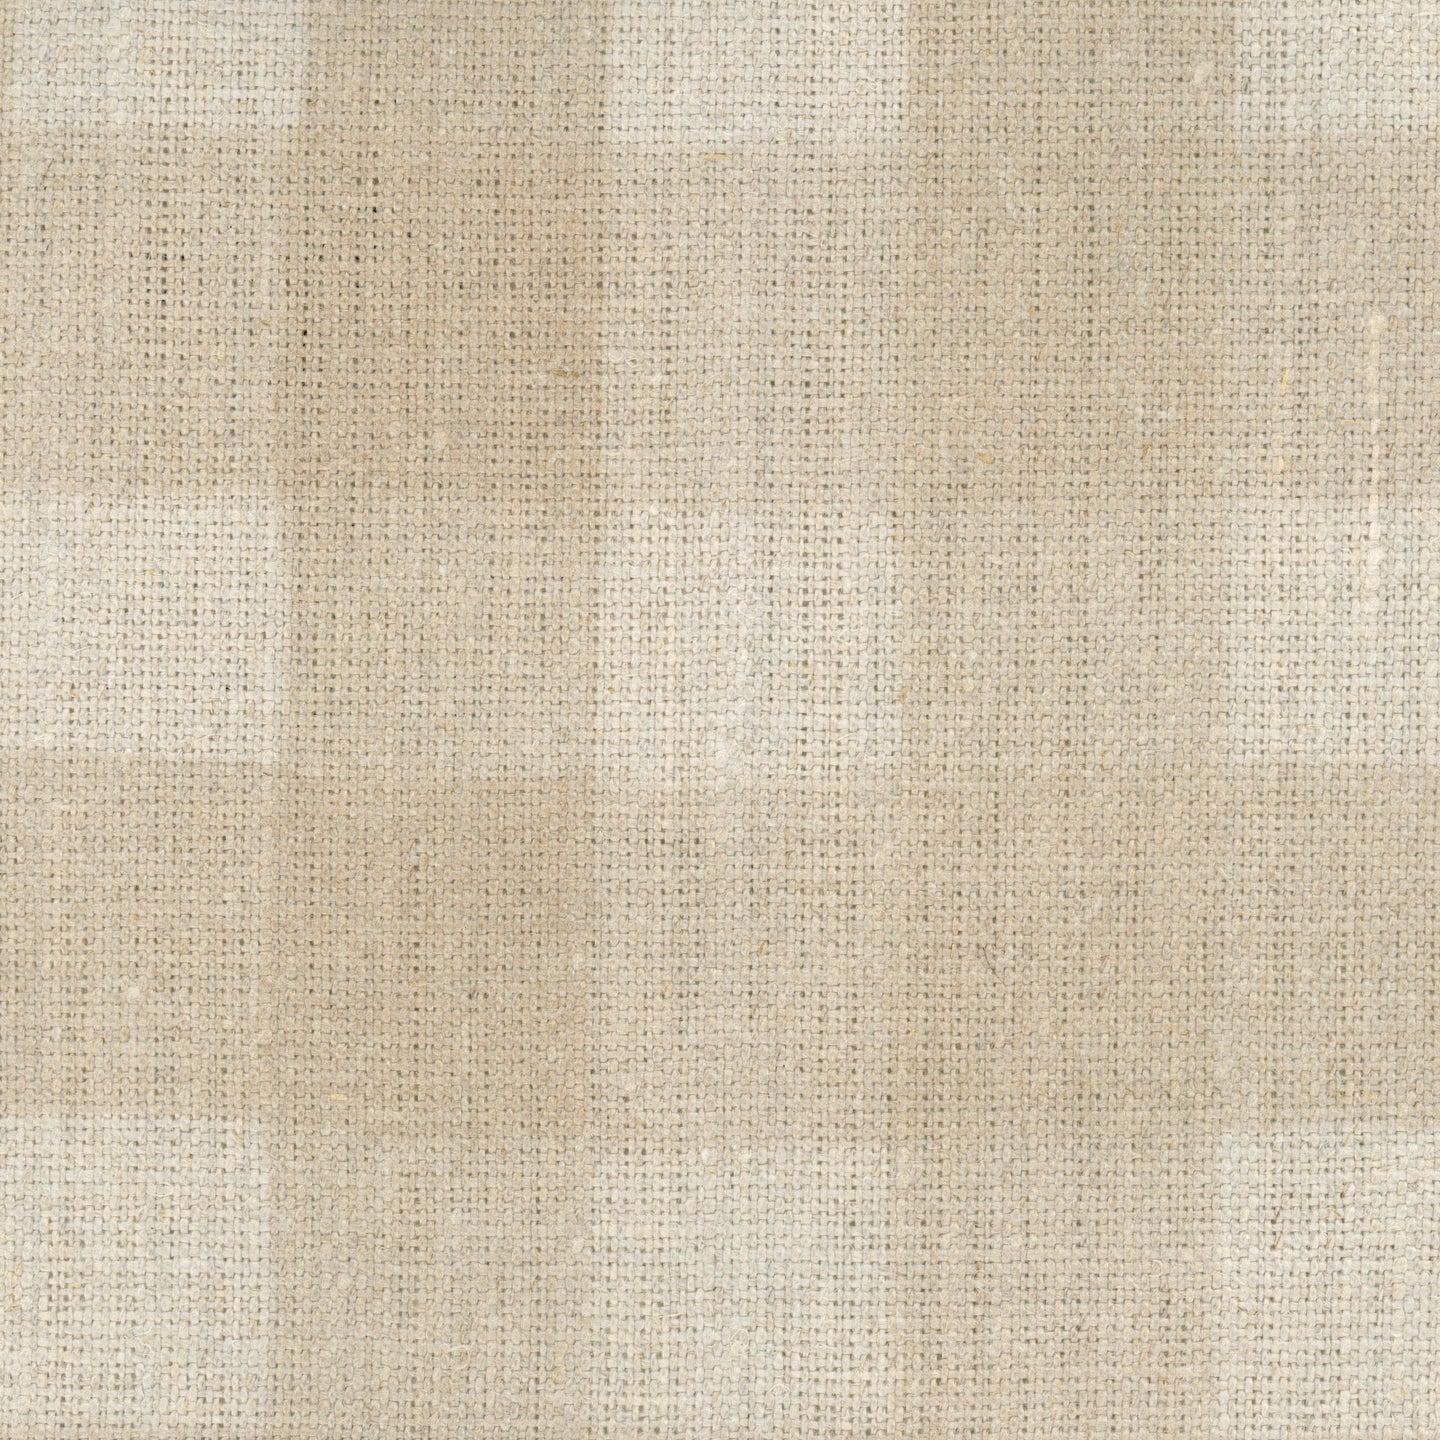 Picnic - Wheat on Natural Fabric